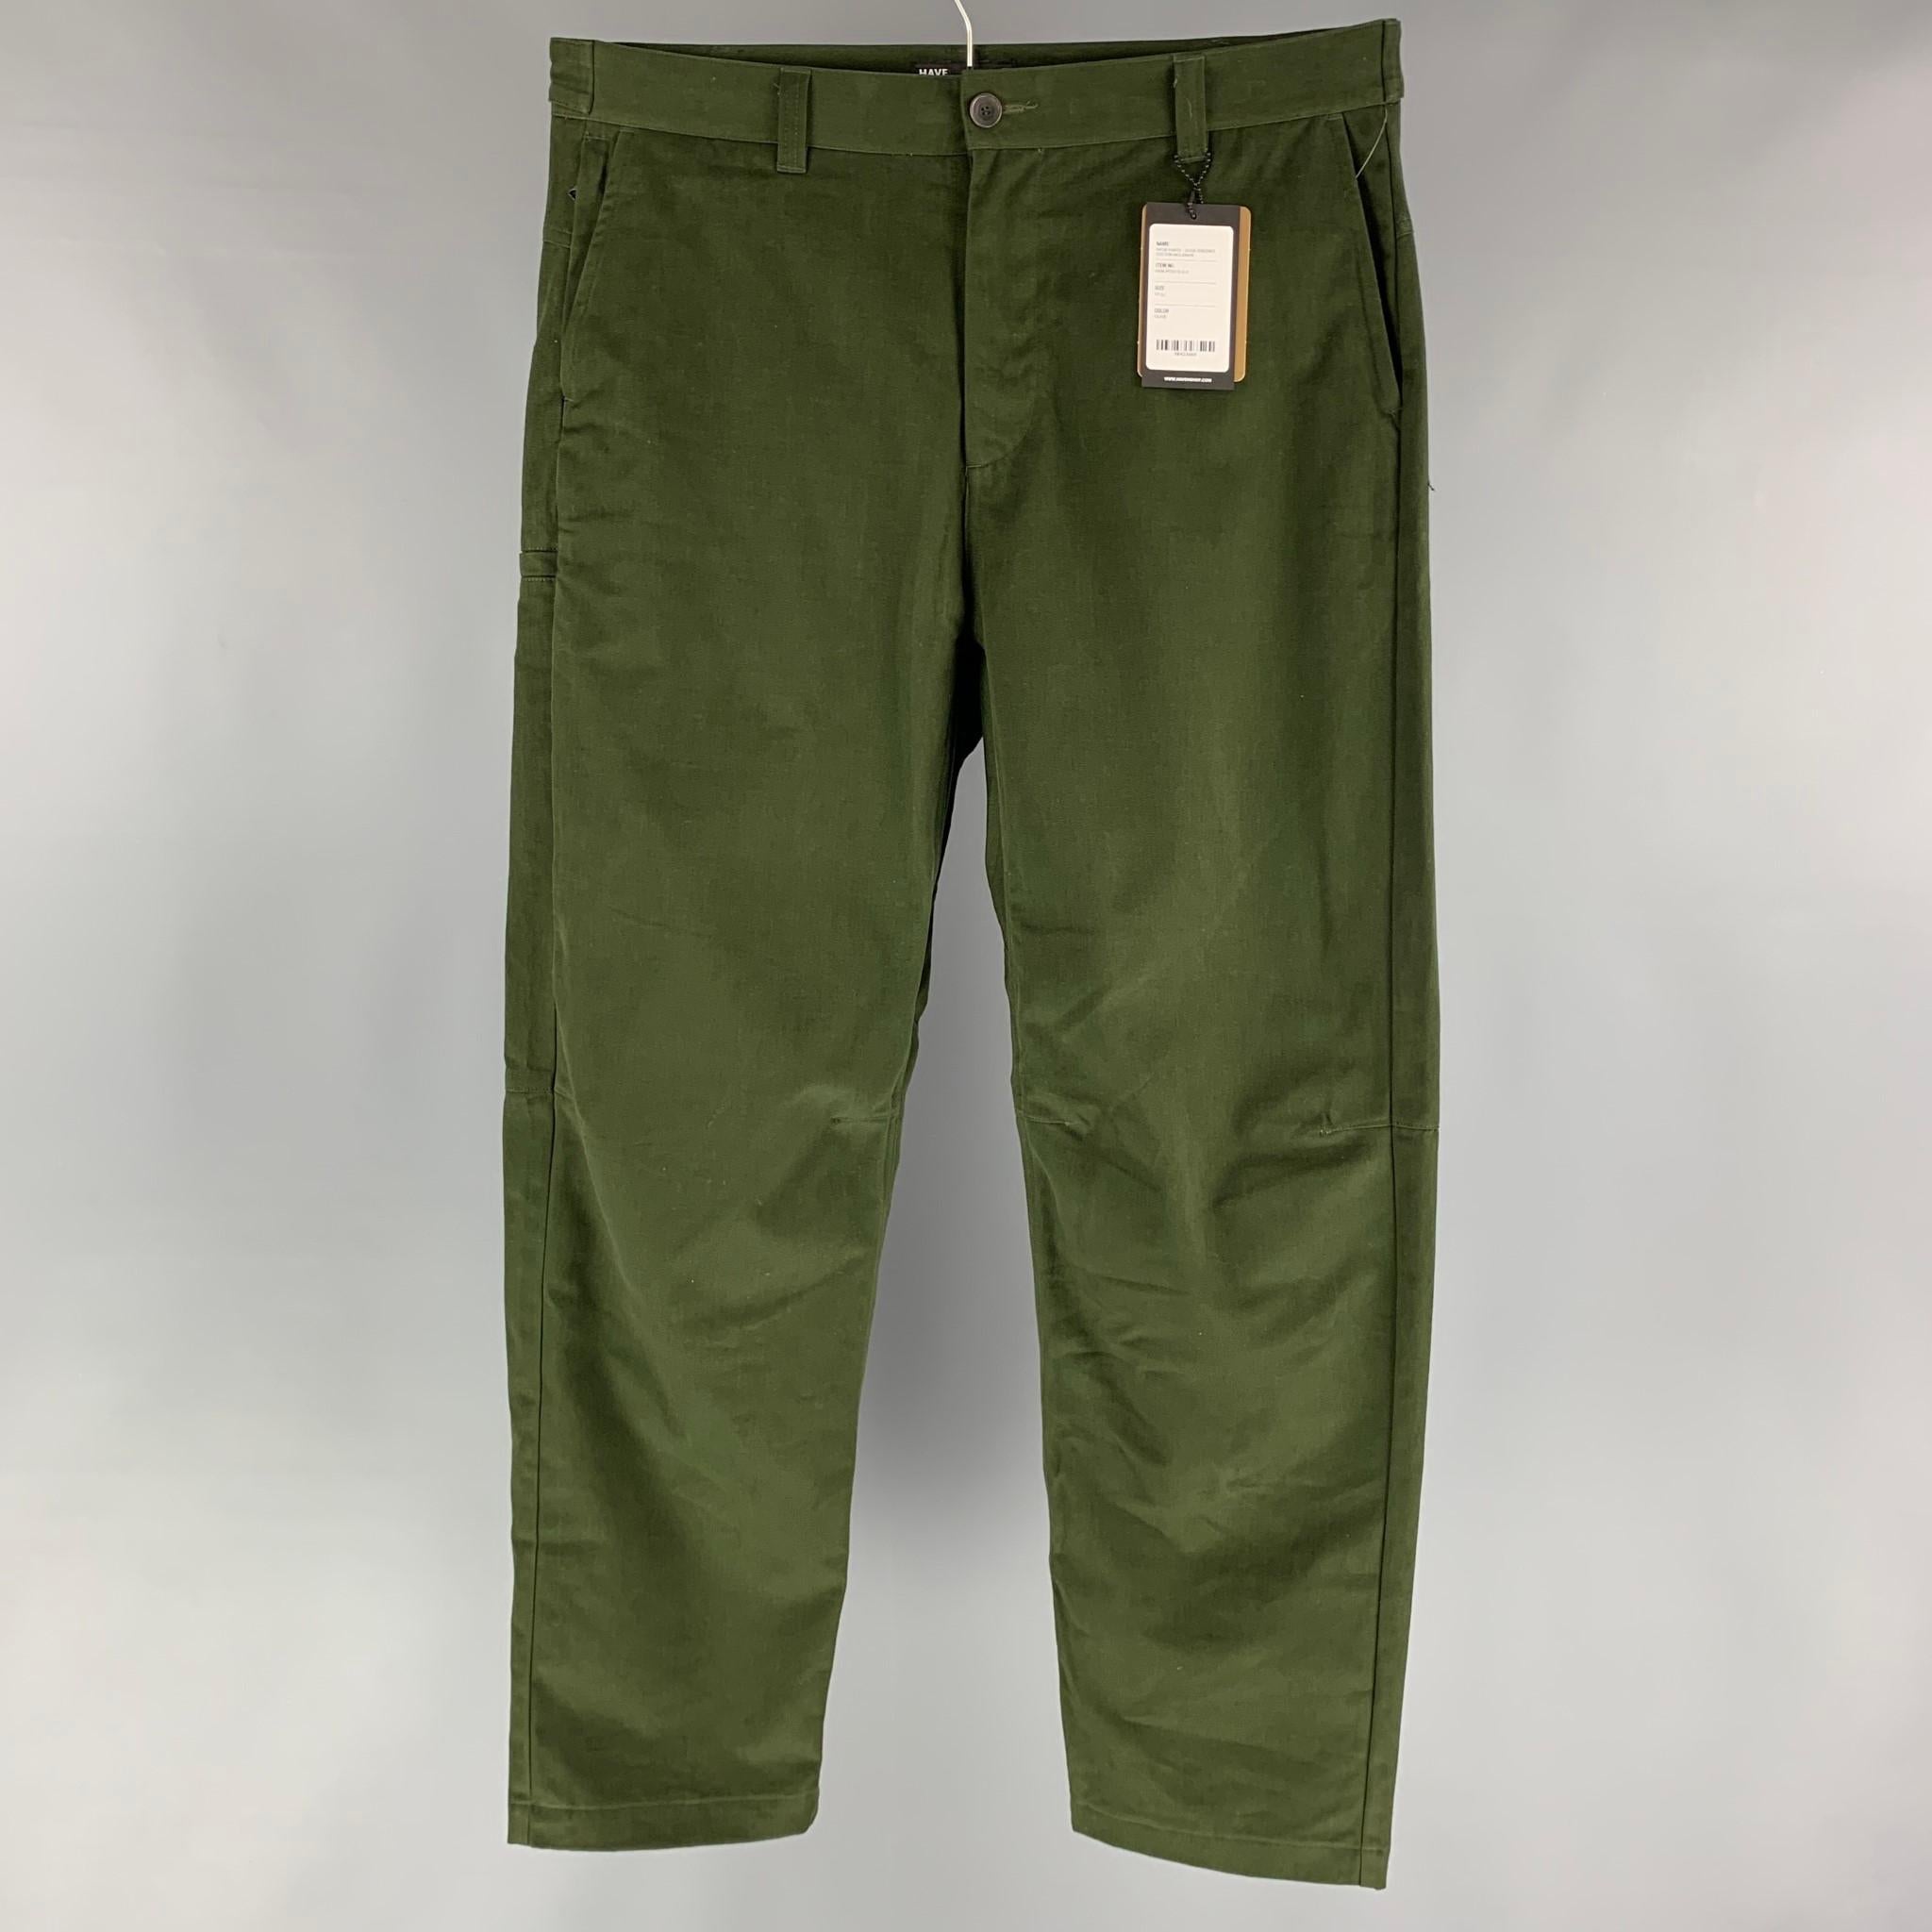 HAVEN 'Opus Pants' casual pants comes in a green cotton twill fabric featuring a slate style, a zip up pocket, a lateral pocket, snap button detail at waistband and a button fly closure. Made in Canada.

New With Tags.
Marked: